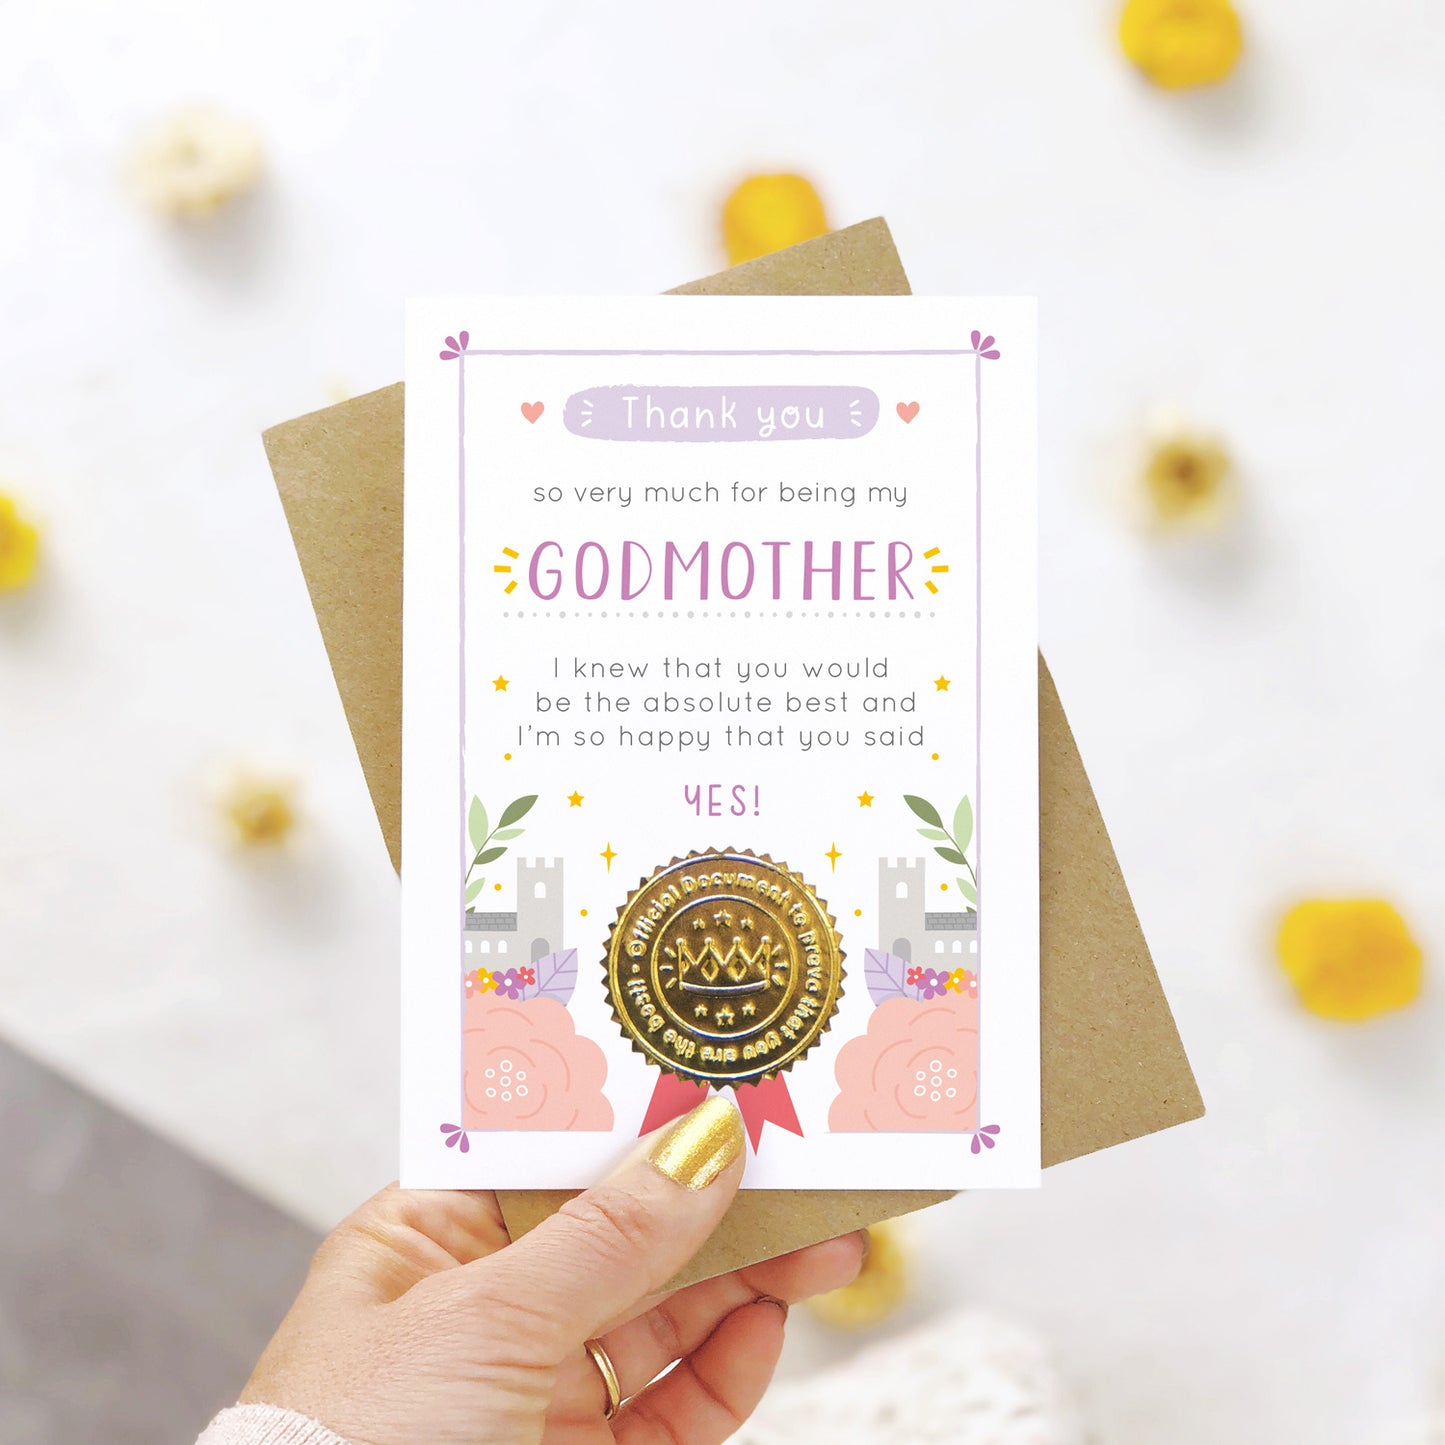 A ‘thank you for being my godmother’ certificate card with a shiny gold seal in the purple colour palette being held over a white background with yellow and natural flowers.